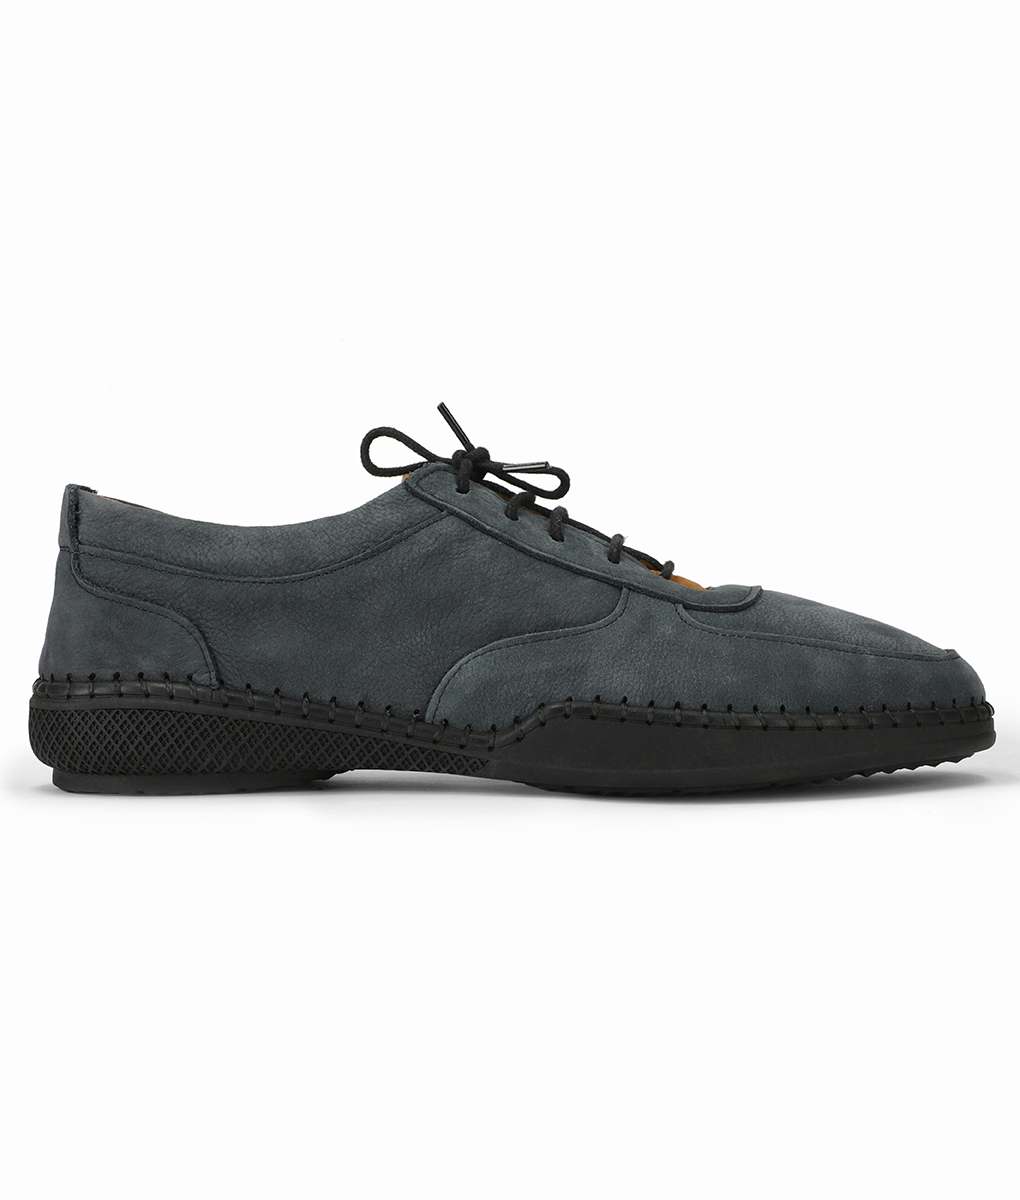 Dual-tone Blue Sporty Suede Leather Shoes for Men